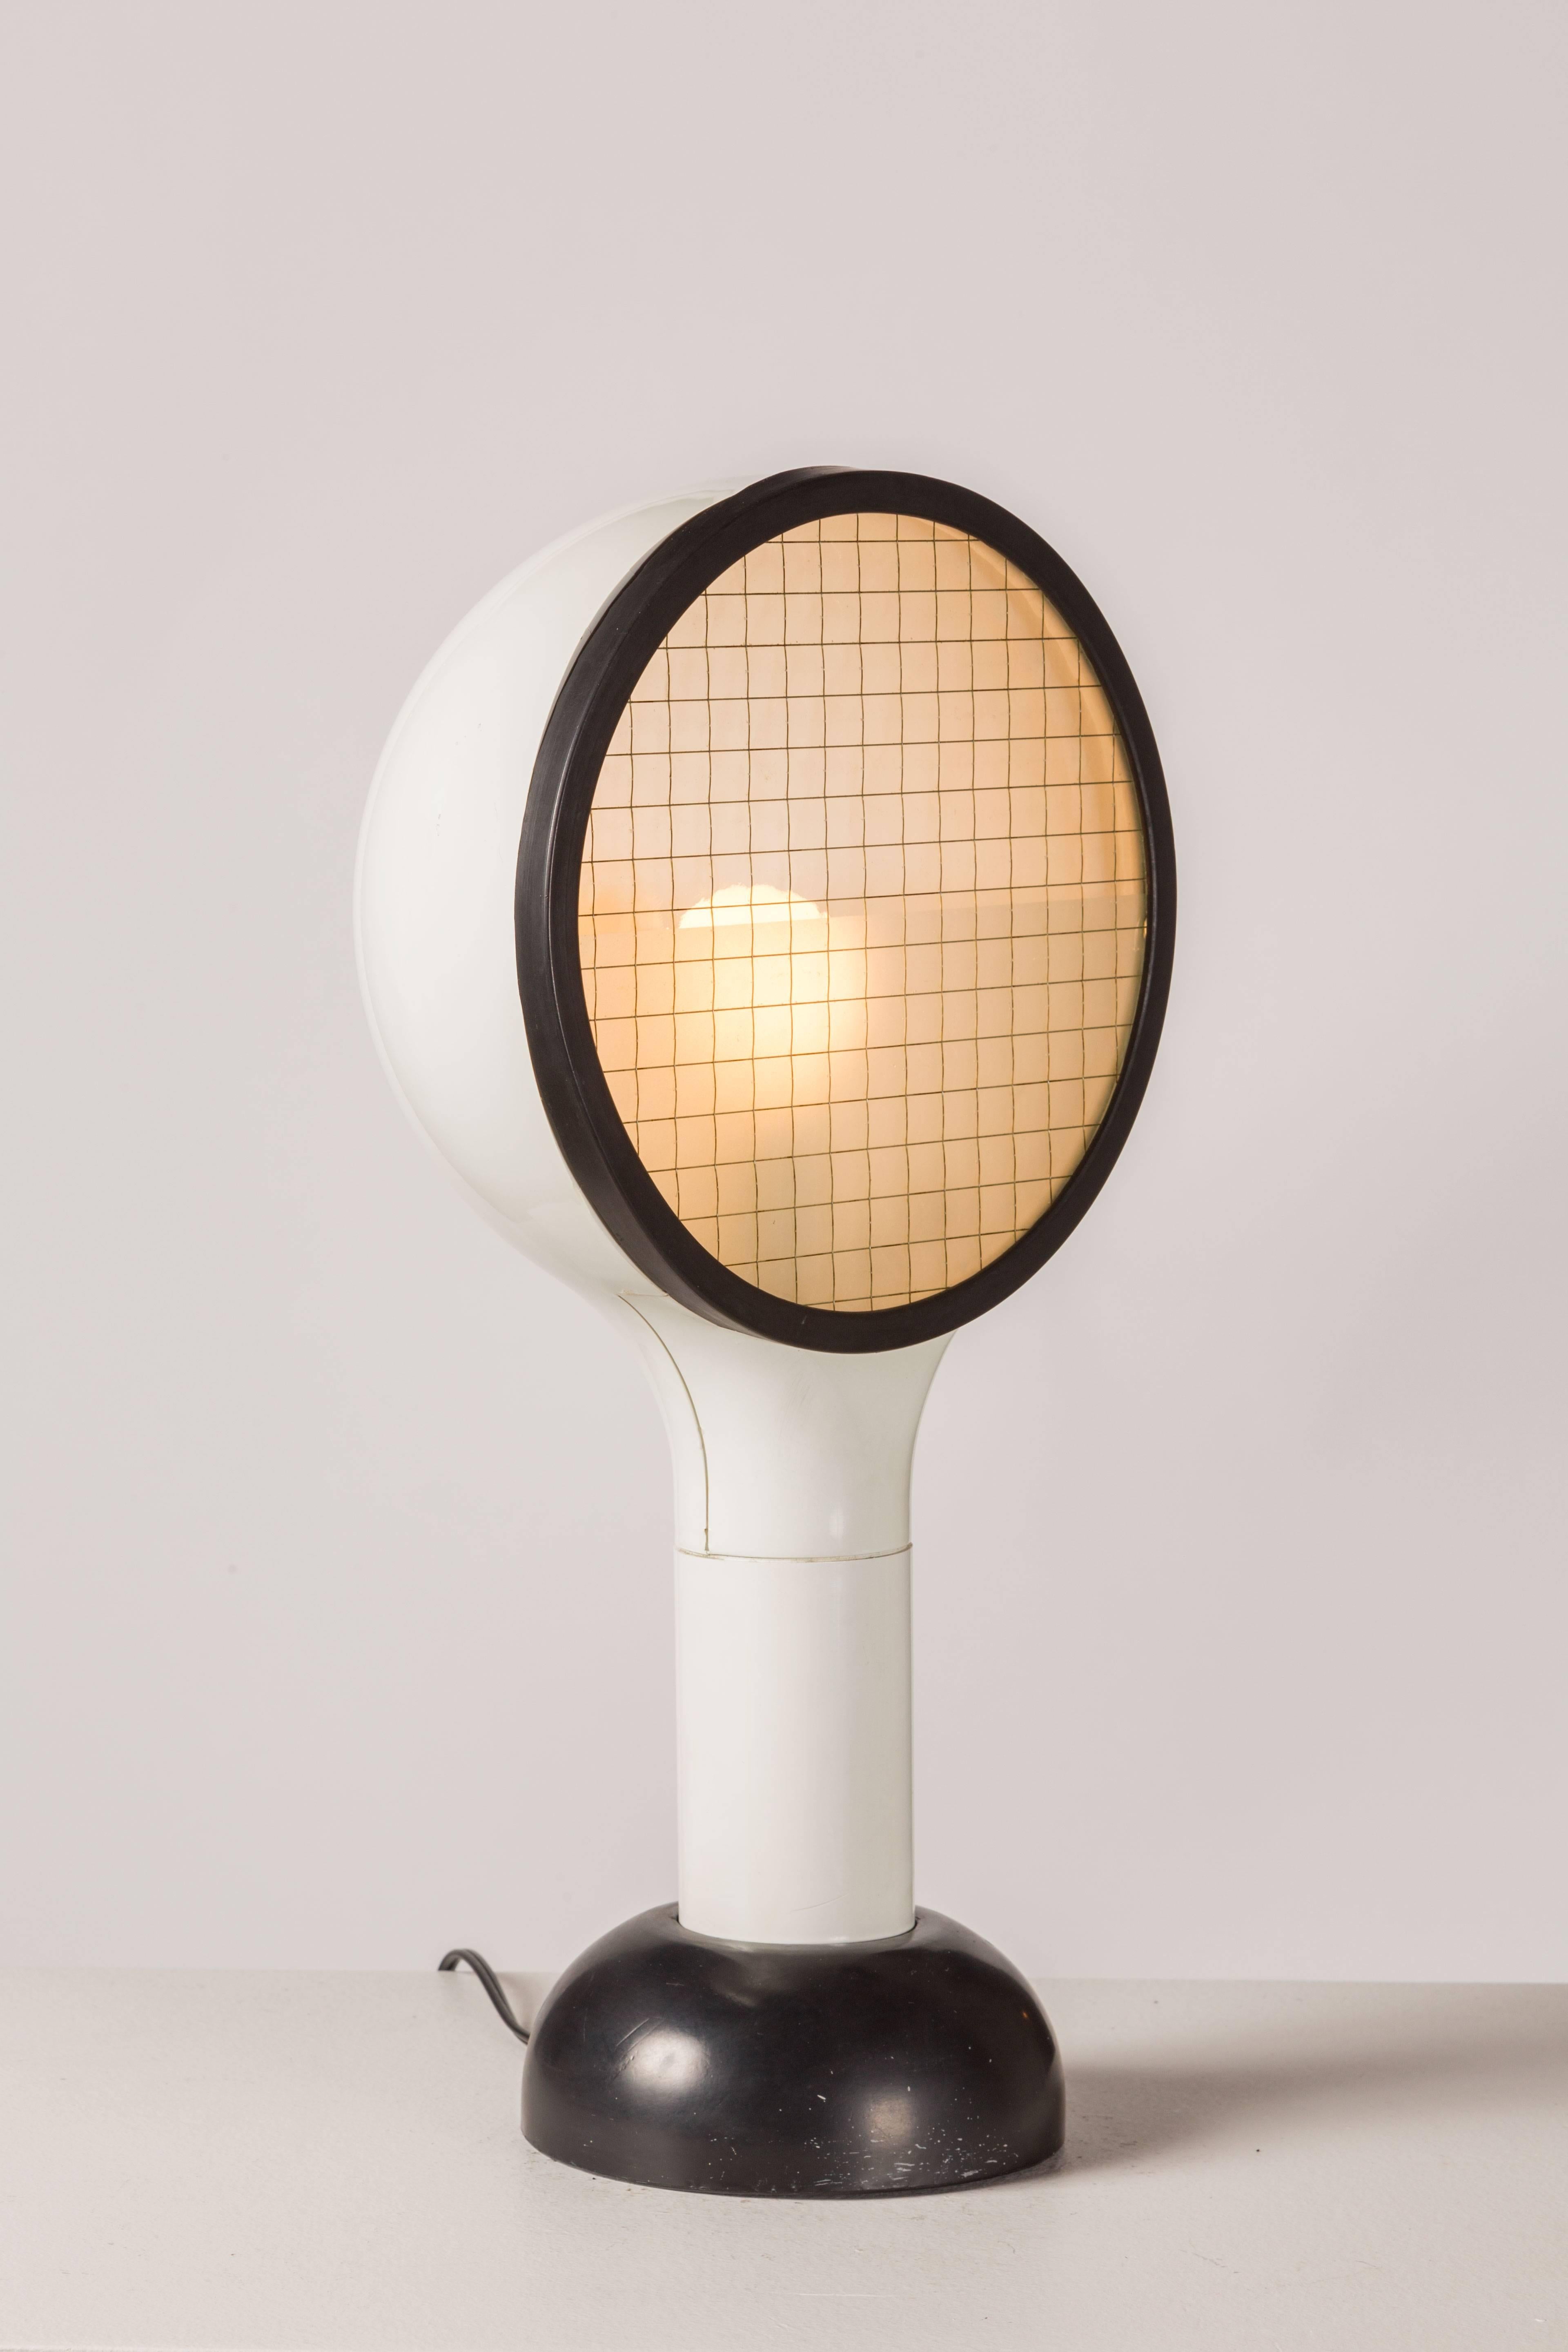 Two table lamps in white plastic with black rubber base. Designed by Adalberto Dal Lago for Bieffeplast in 1974. Safety glass with wire grid. Lower half of safety glass is sandblasted. E26 75W maximum bulb. Original cord.